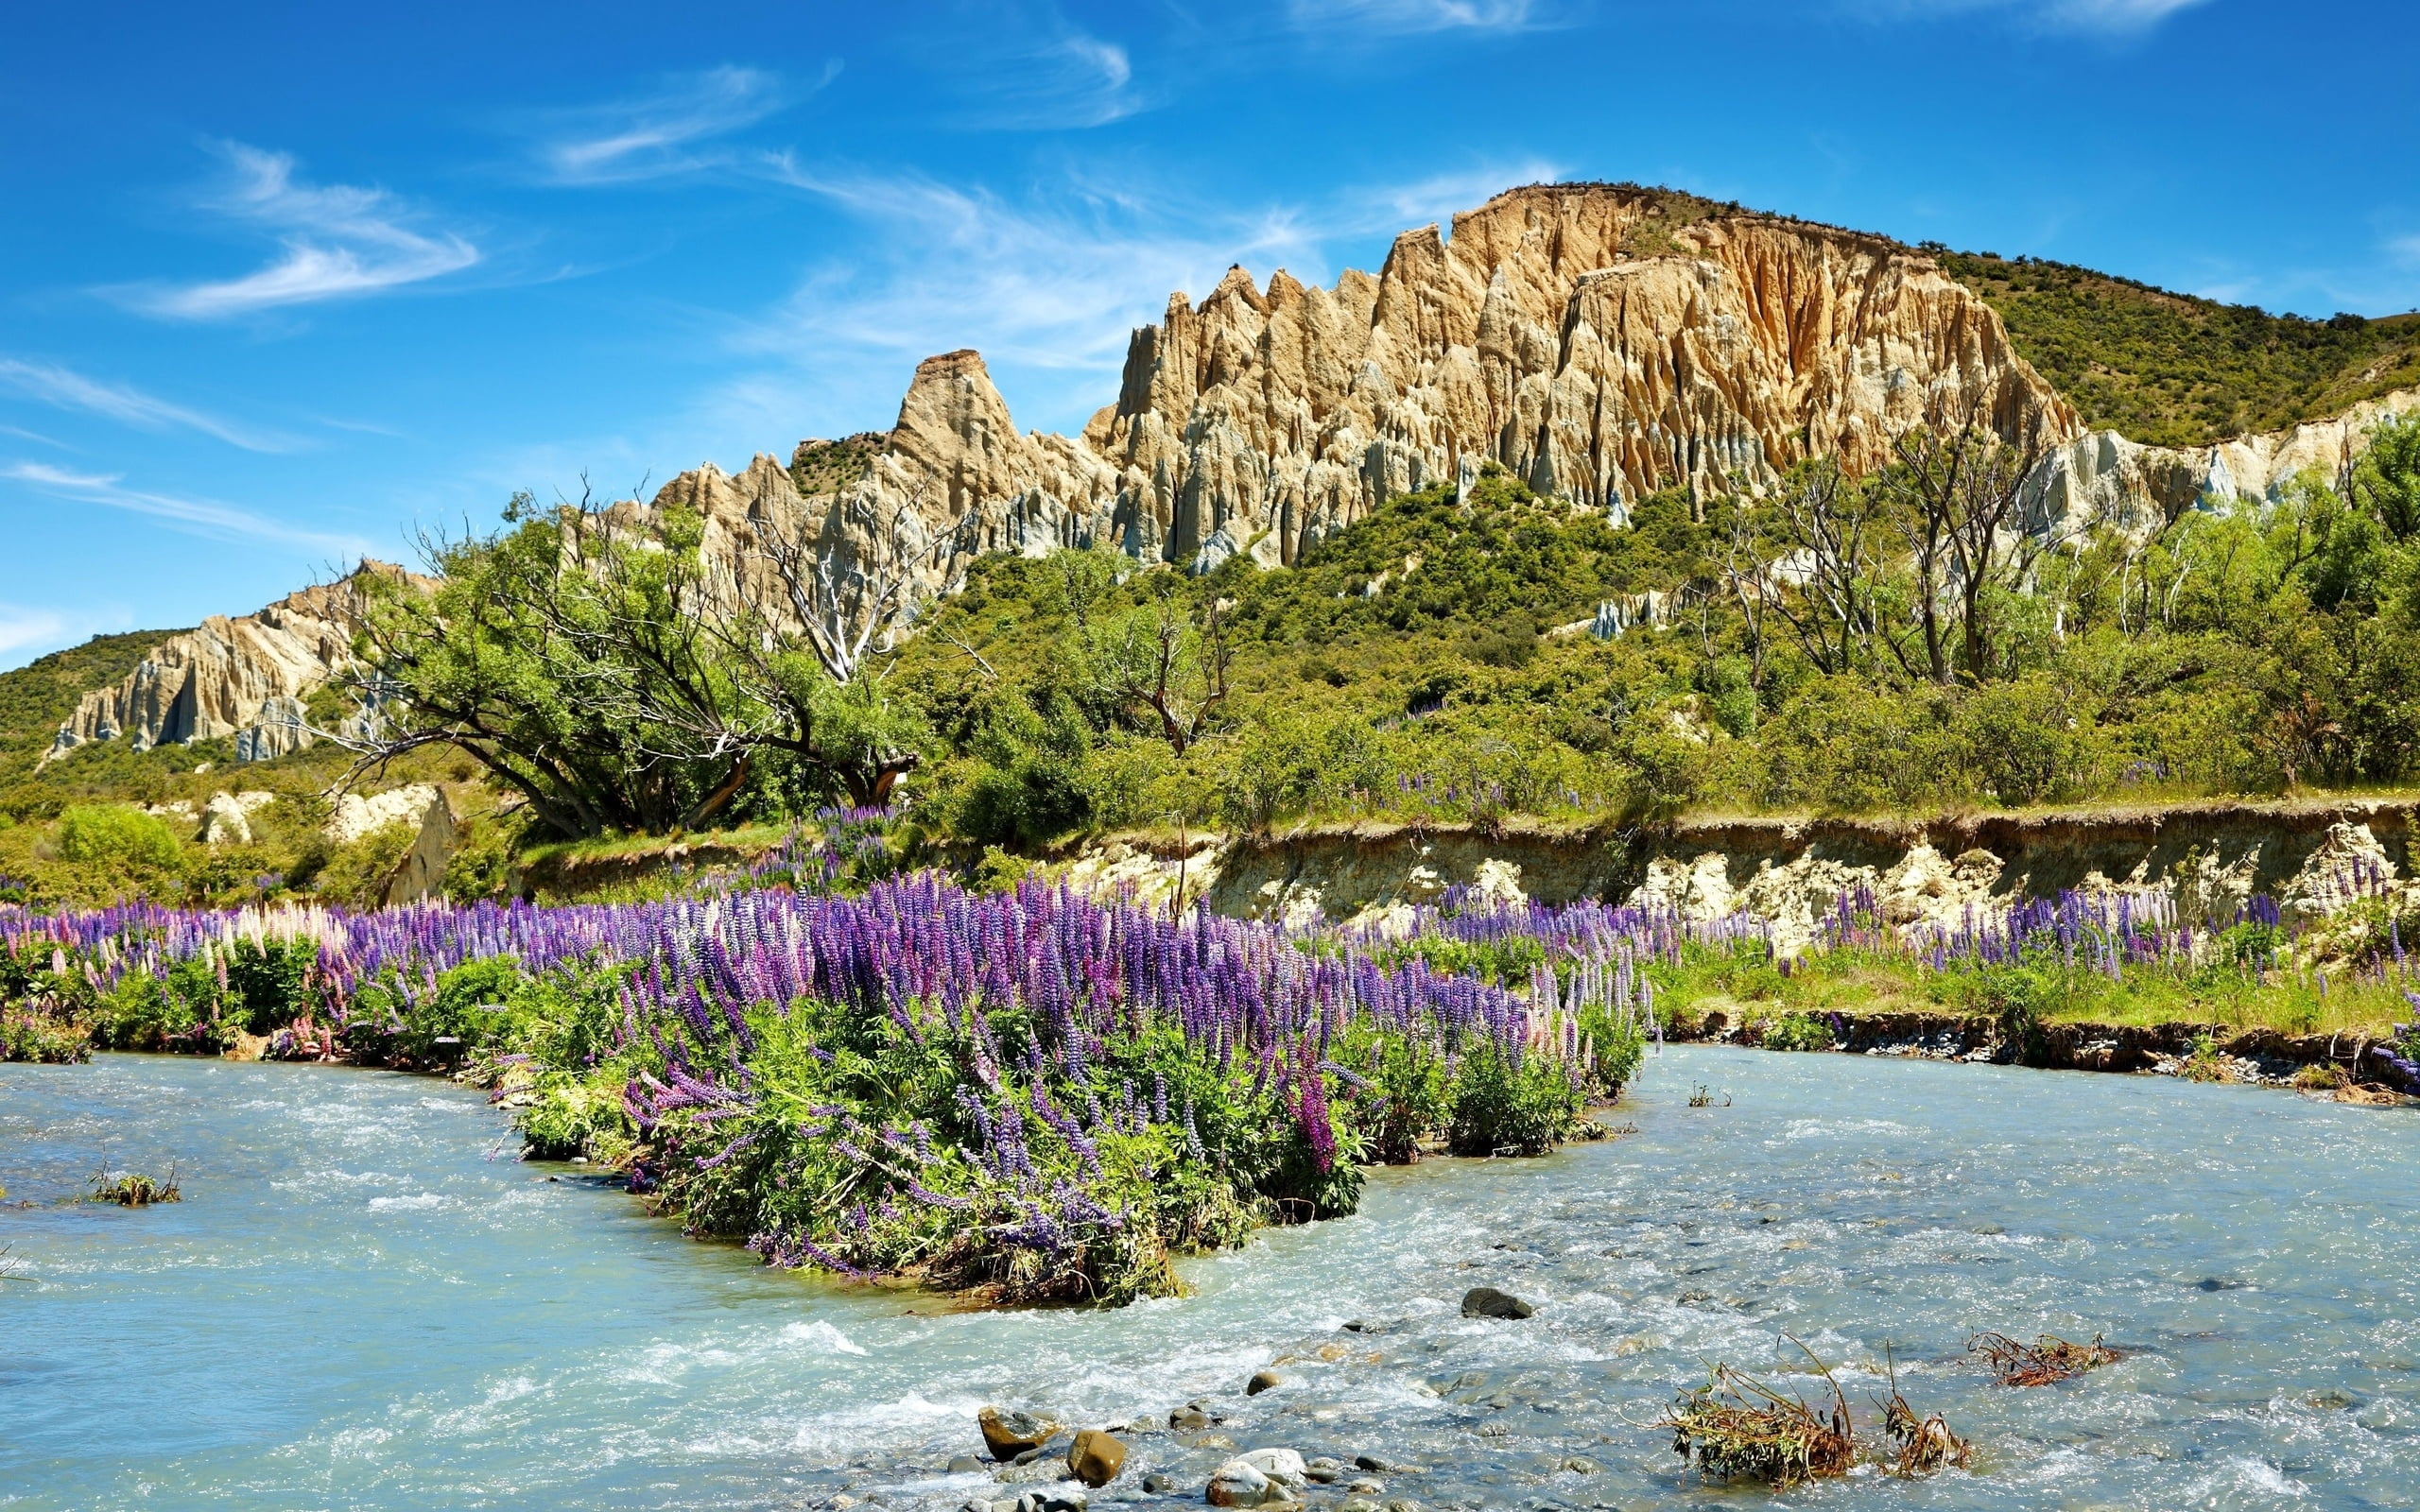 high-saturated landscape photography of purple petaled flowers on body of water and brown mountains under blue calm sky